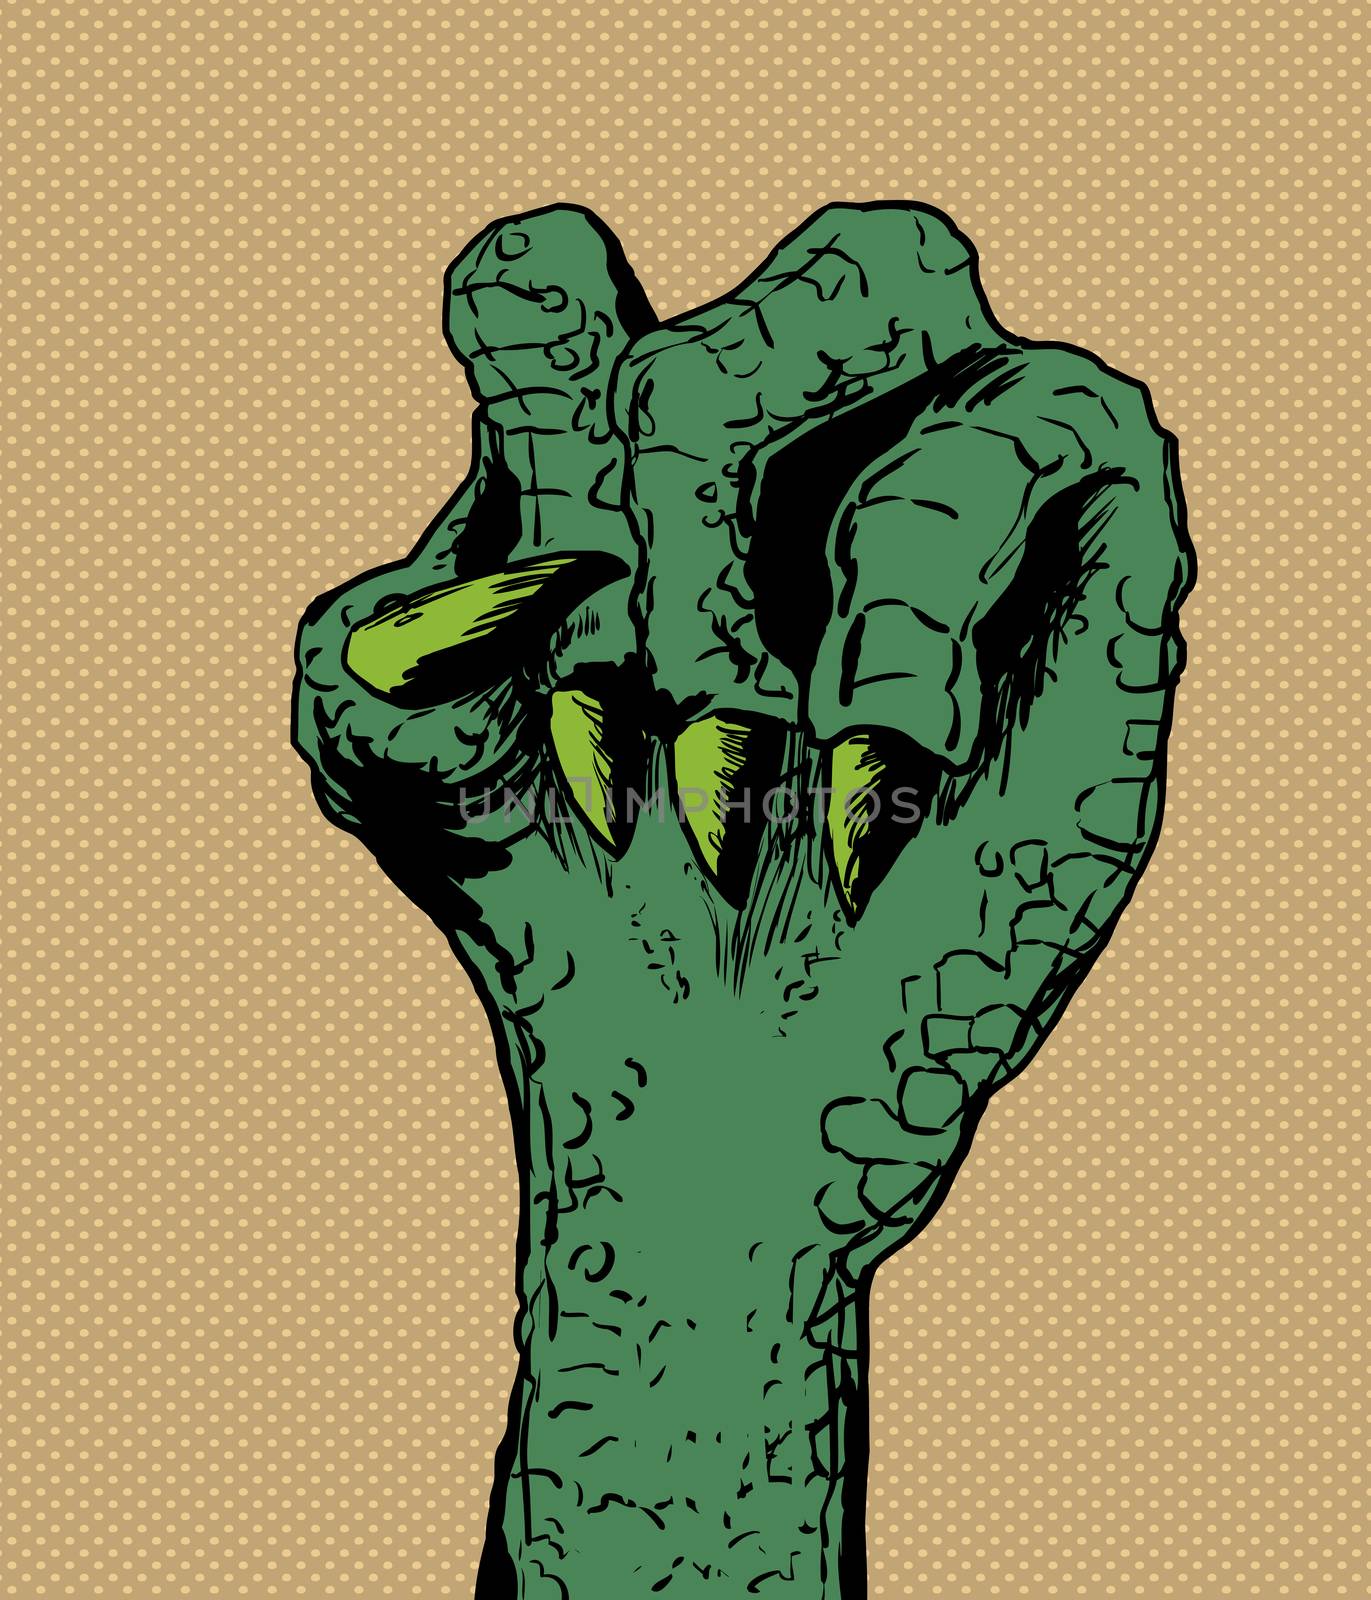 Green Lizard Clenched Fist by TheBlackRhino